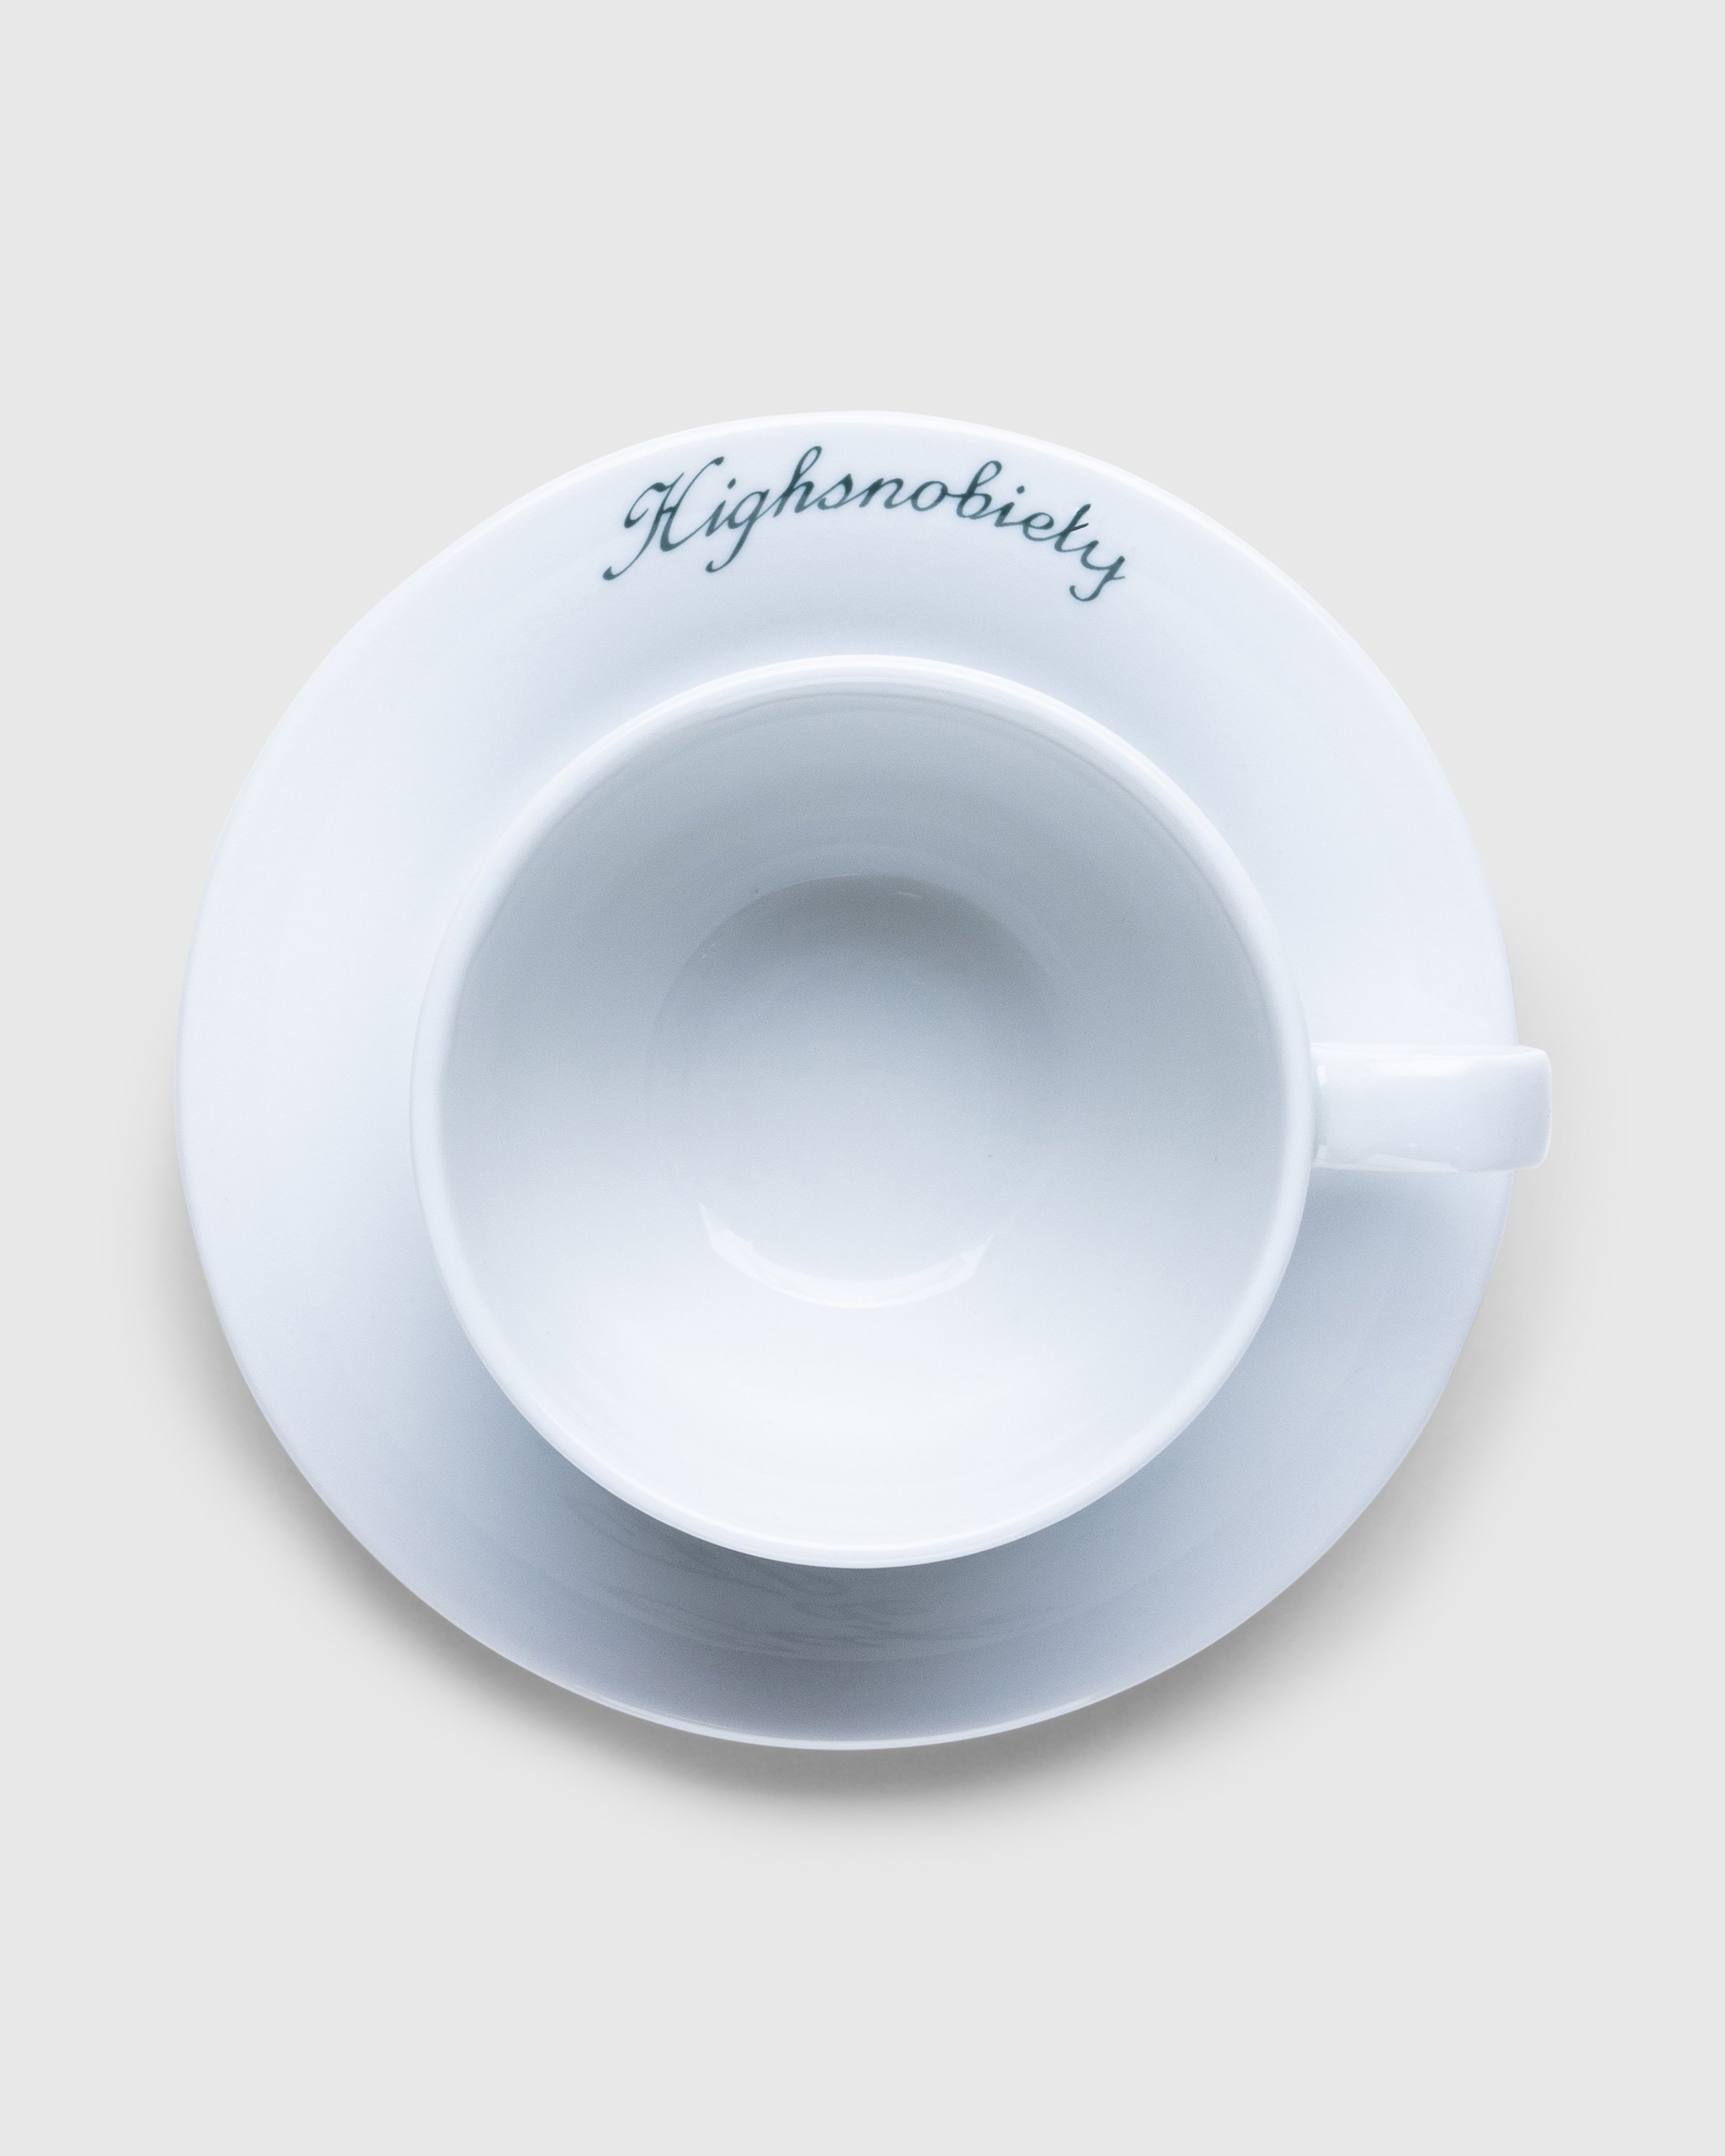 Café de Flore x Highsnobiety - Breakfast Cup and Saucer - Lifestyle - White - Image 3